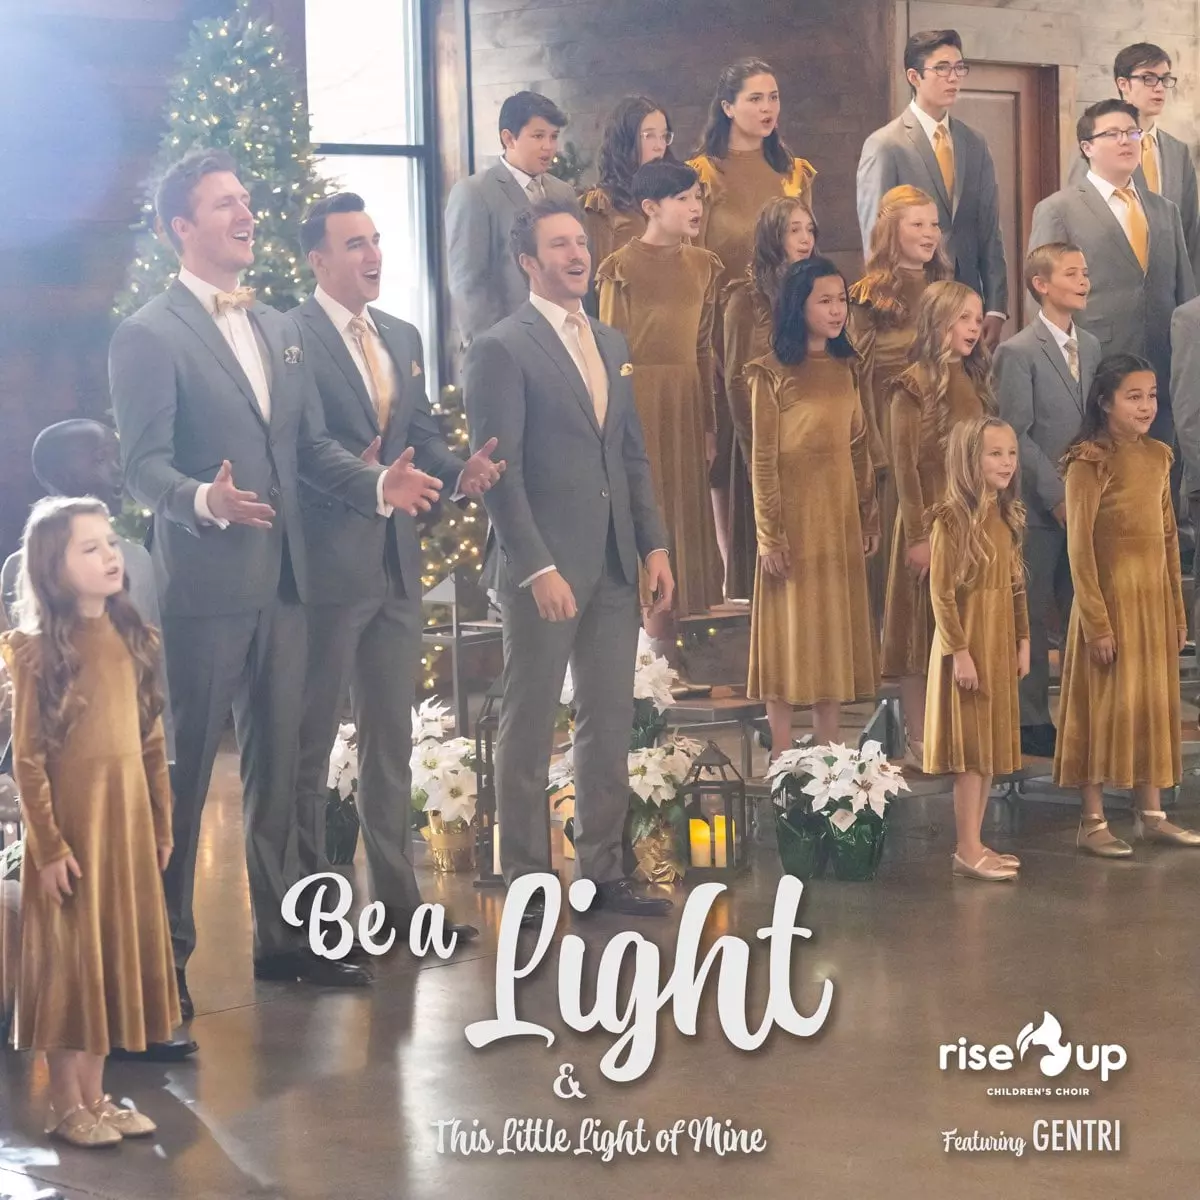 Be a Light / This Little Light of Mine (feat. GENTRI) - Single by Rise Up Children's Choir on Apple Music